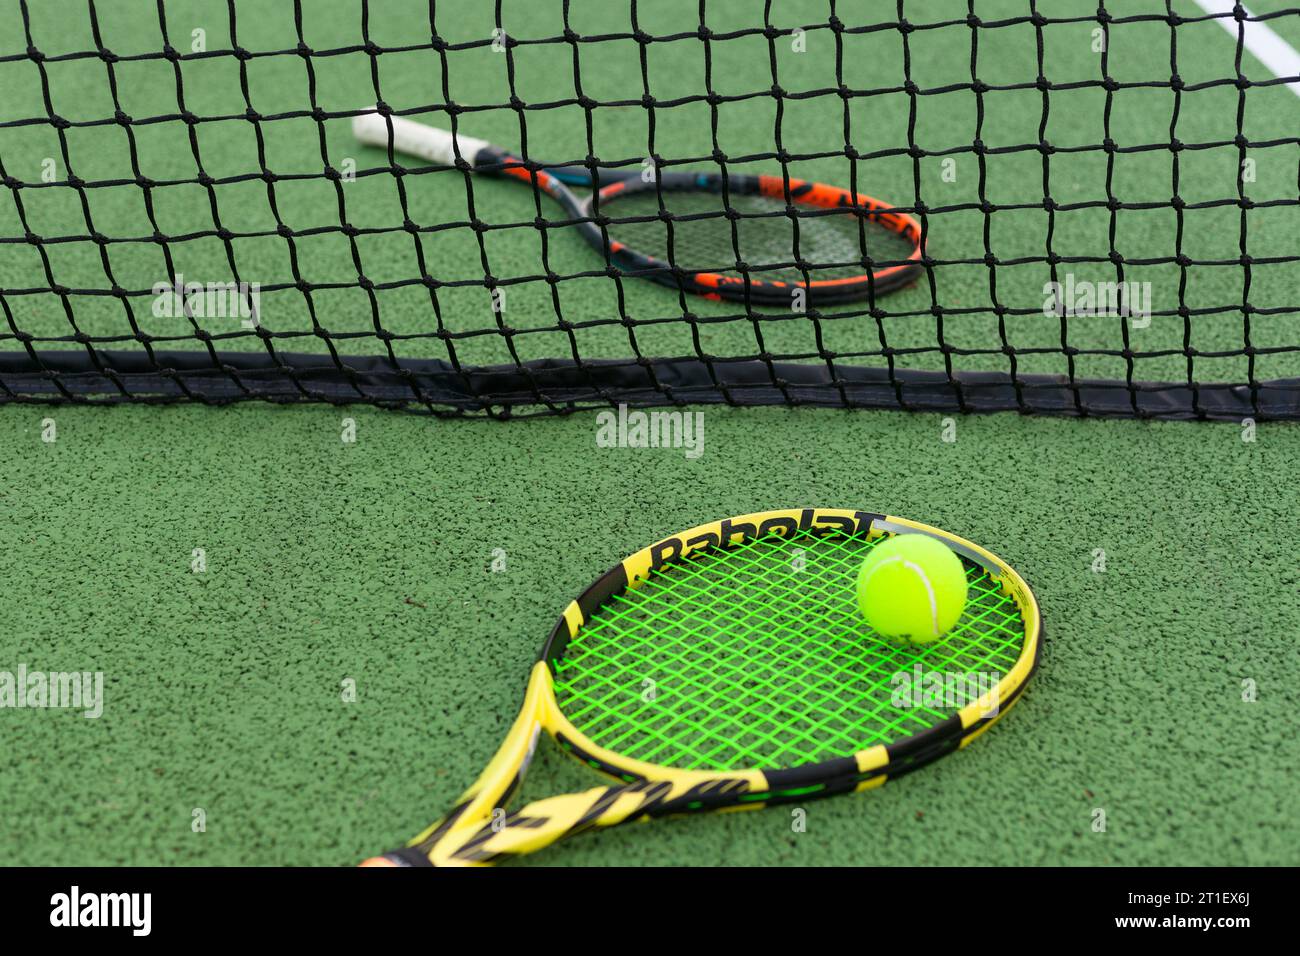 tennis racket next to a ball and line Stock Photo